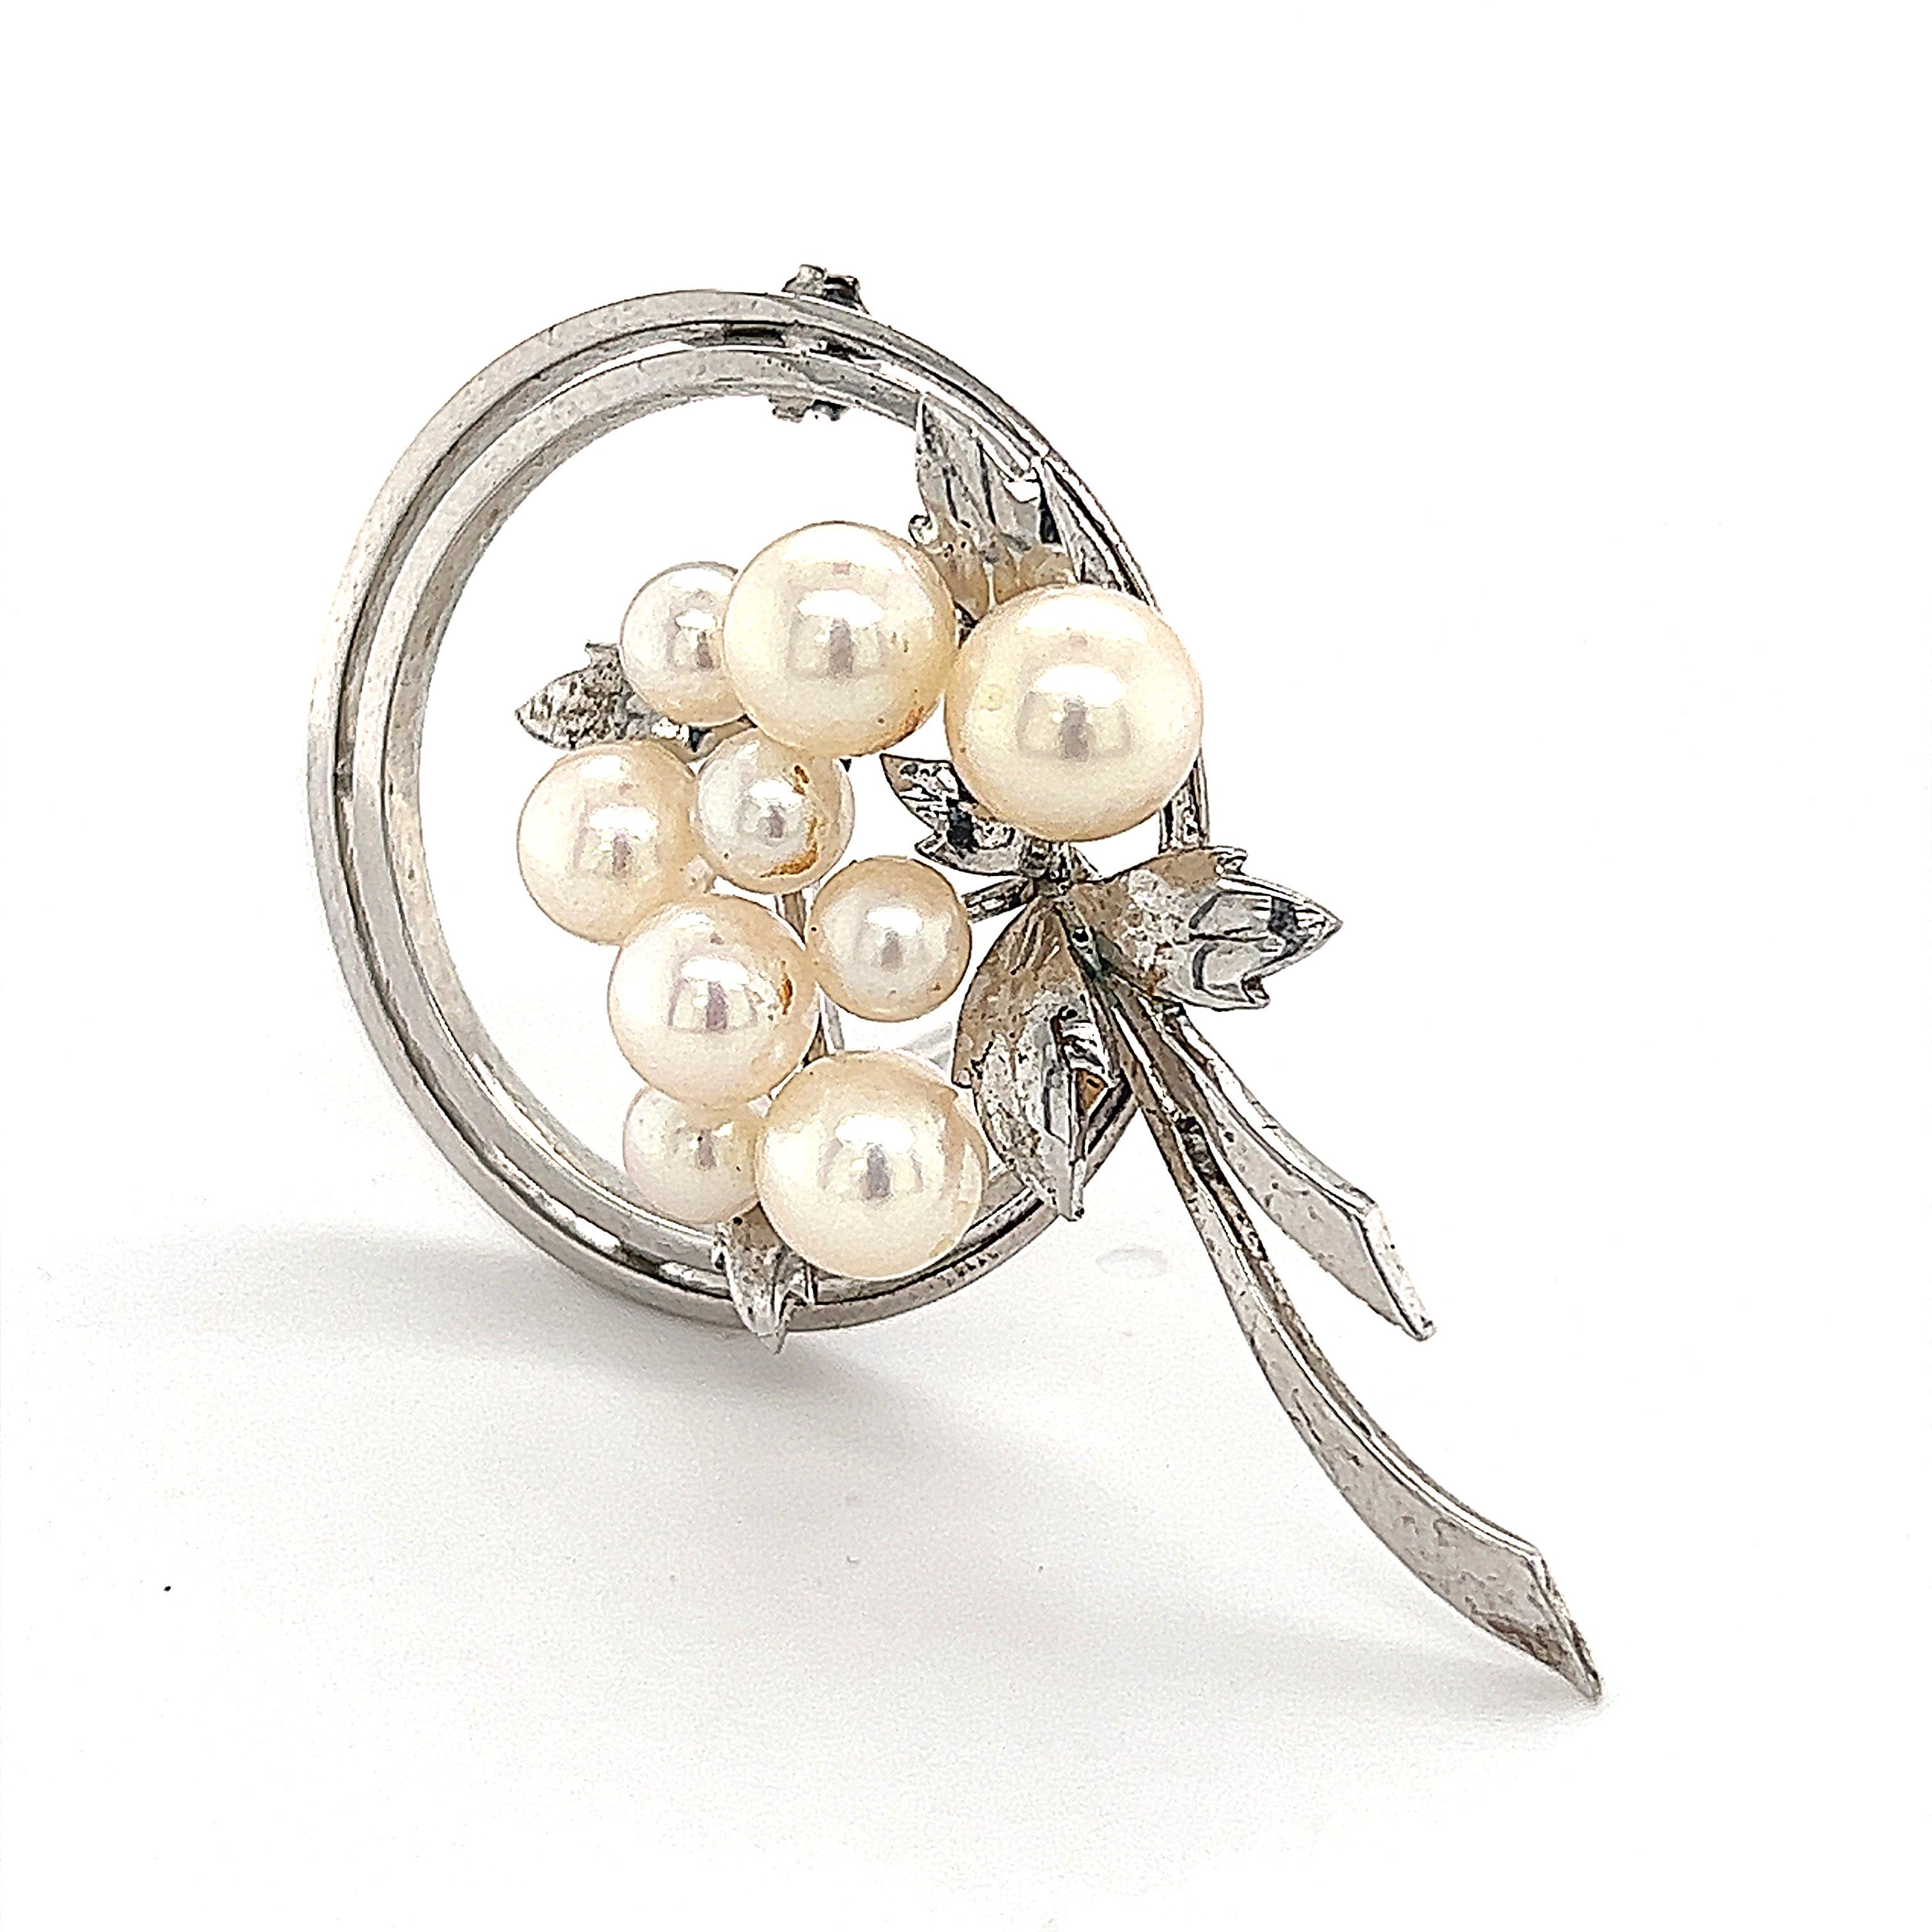 Mikimoto Estate Akoya Pearl Brooch Sterling Silver 6.25 mm 6.8g M245

This elegant Authentic Mikimoto Estate sterling silver brooch has 9 Saltwater Akoya Cultured Pearls and has a weight of 6.8 Grams.

TRUSTED SELLER SINCE 2002

PLEASE SEE OUR